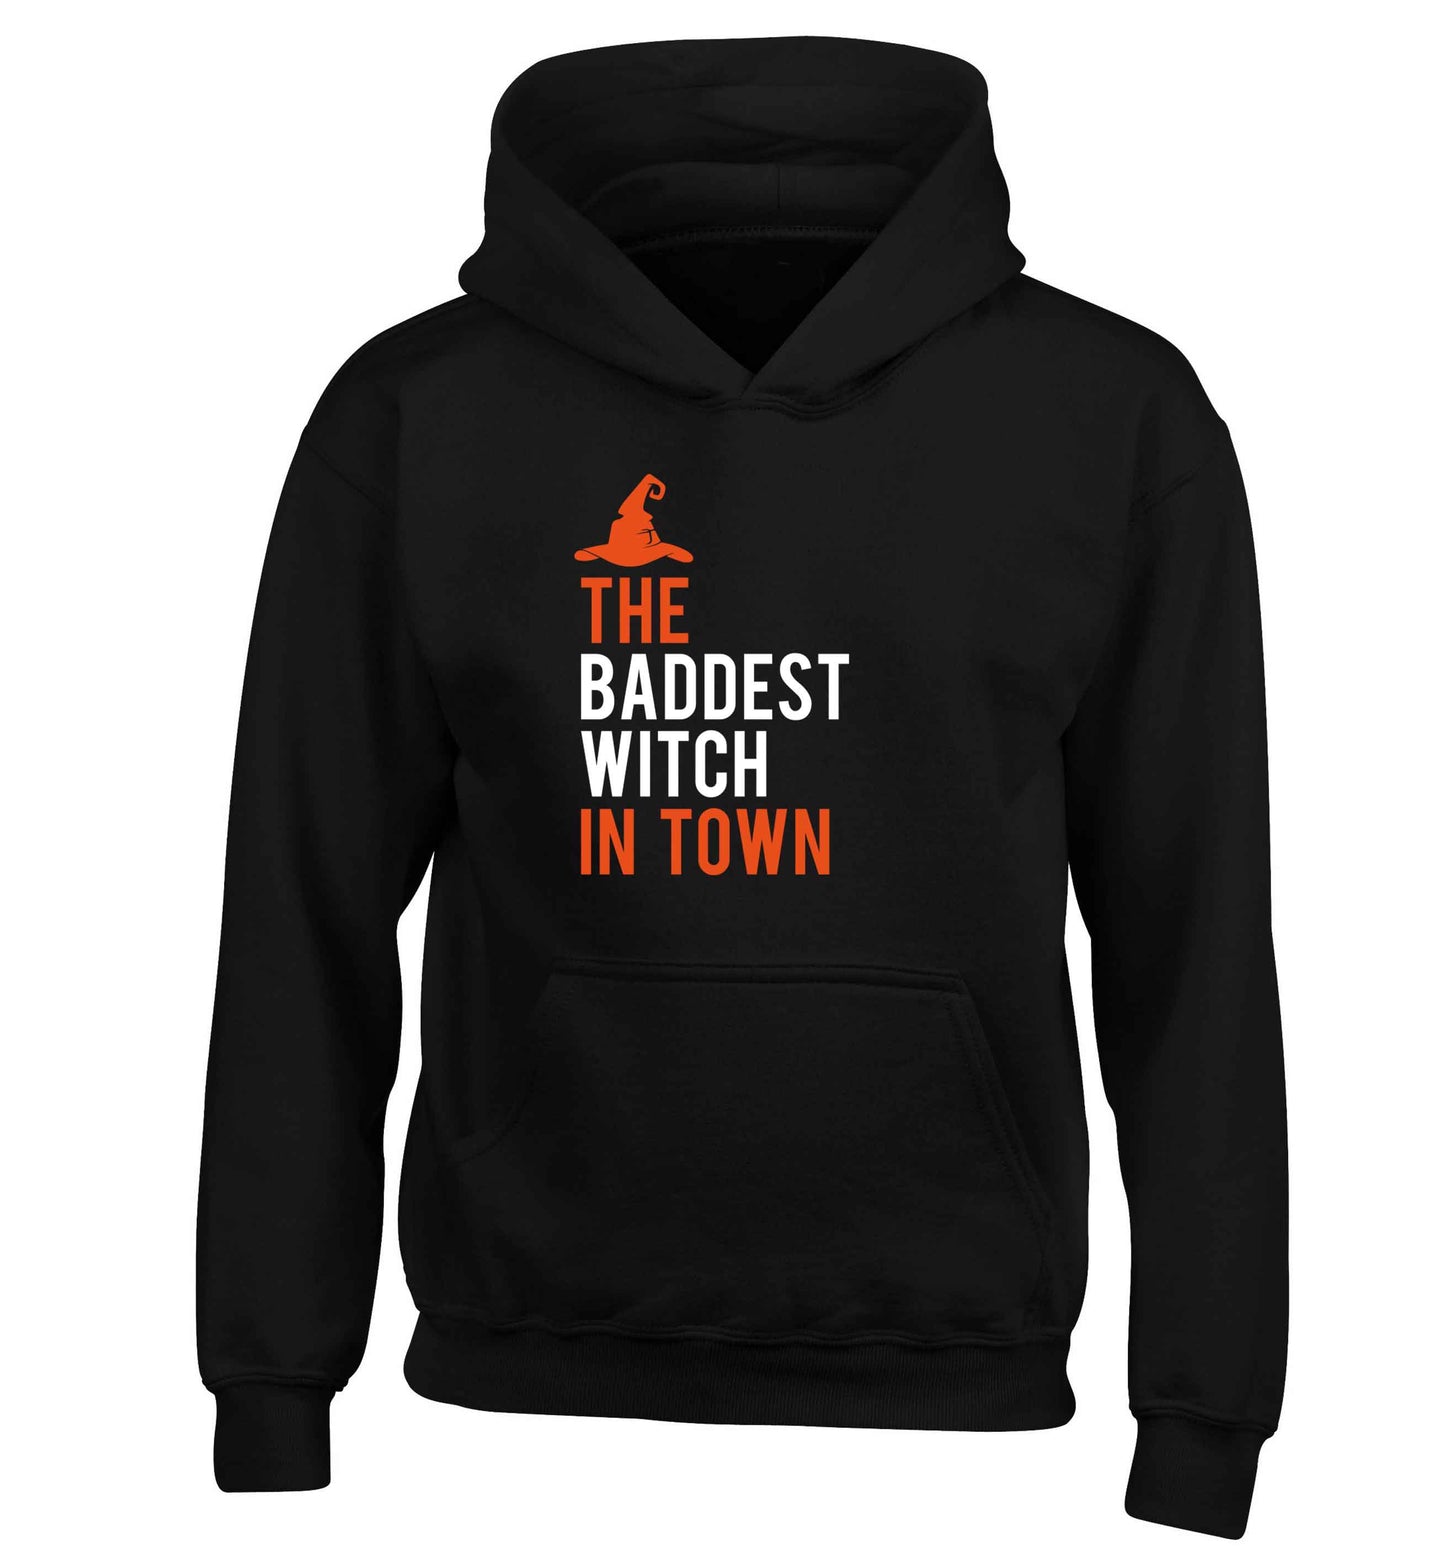 Badest witch in town children's black hoodie 12-13 Years